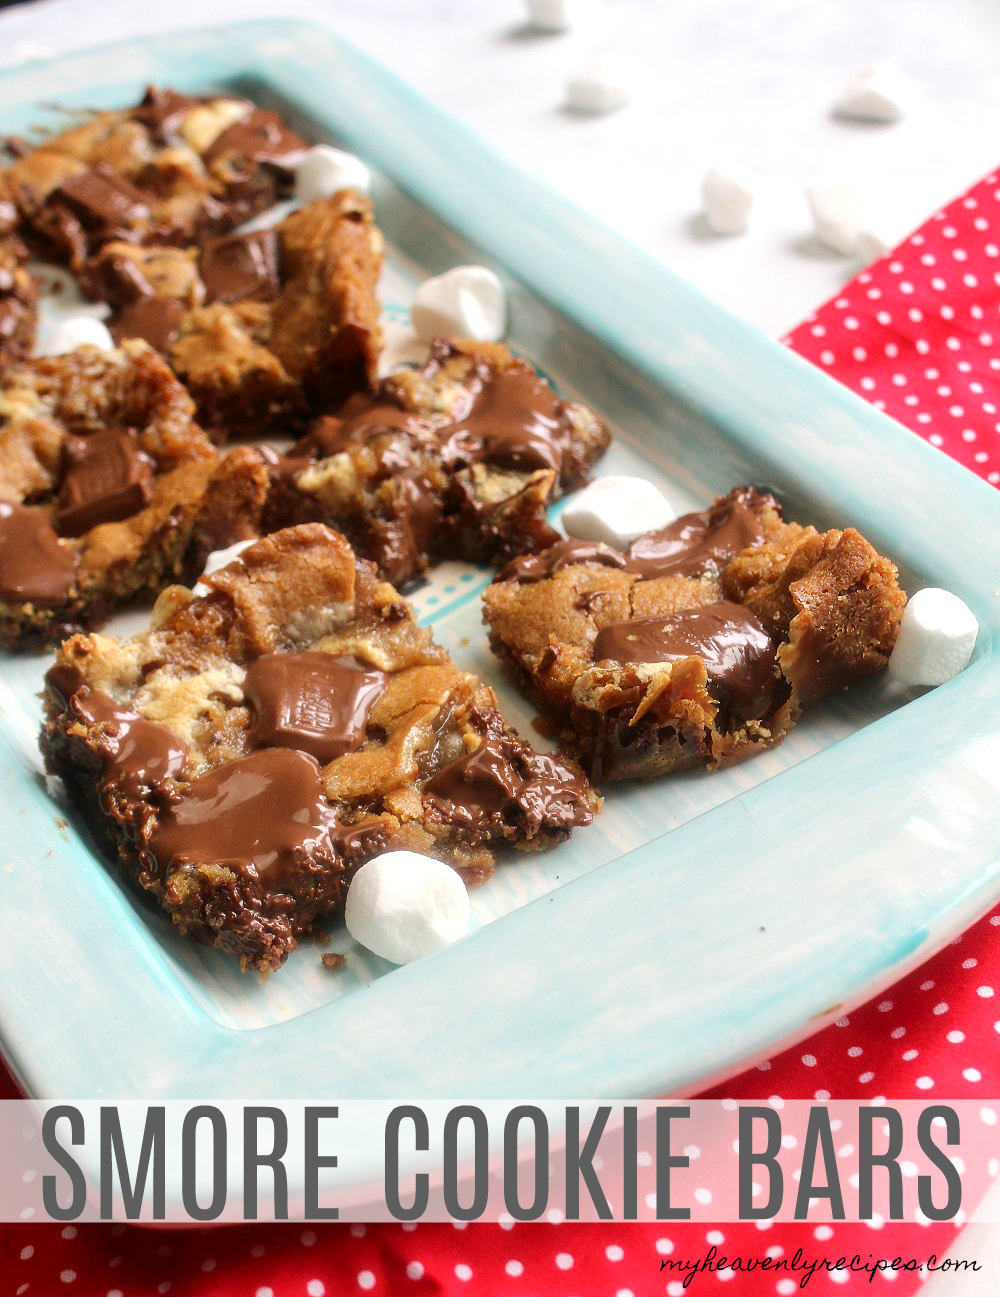 Grab these 3 simple ingredients, the kids and spend some time together making Smore Cookie Bars for dessert!